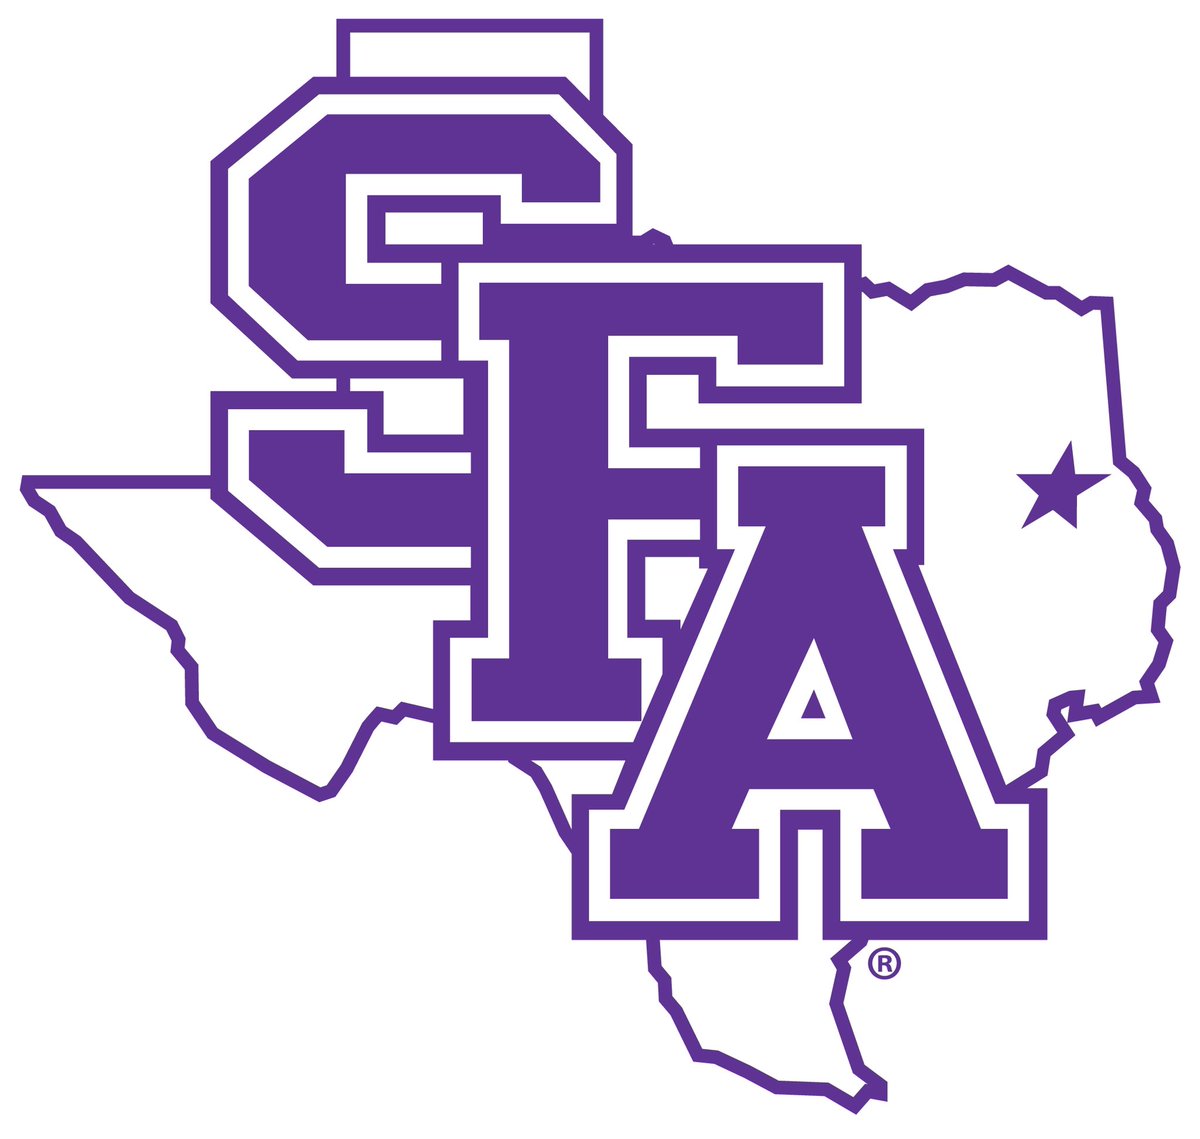 After an amazing conversation with @CoachCarthel blessed and honored to receive my 5th D1 scholarship offer from @SFA_Football @CoachTMiller18 @CoachWilson_ @DarrylDJSimon @WRHitList @jackson_dipVYPE @WOLsports @dctf @CoachJayUConn @TXTopTalent @samspiegs @MikeRoach247…